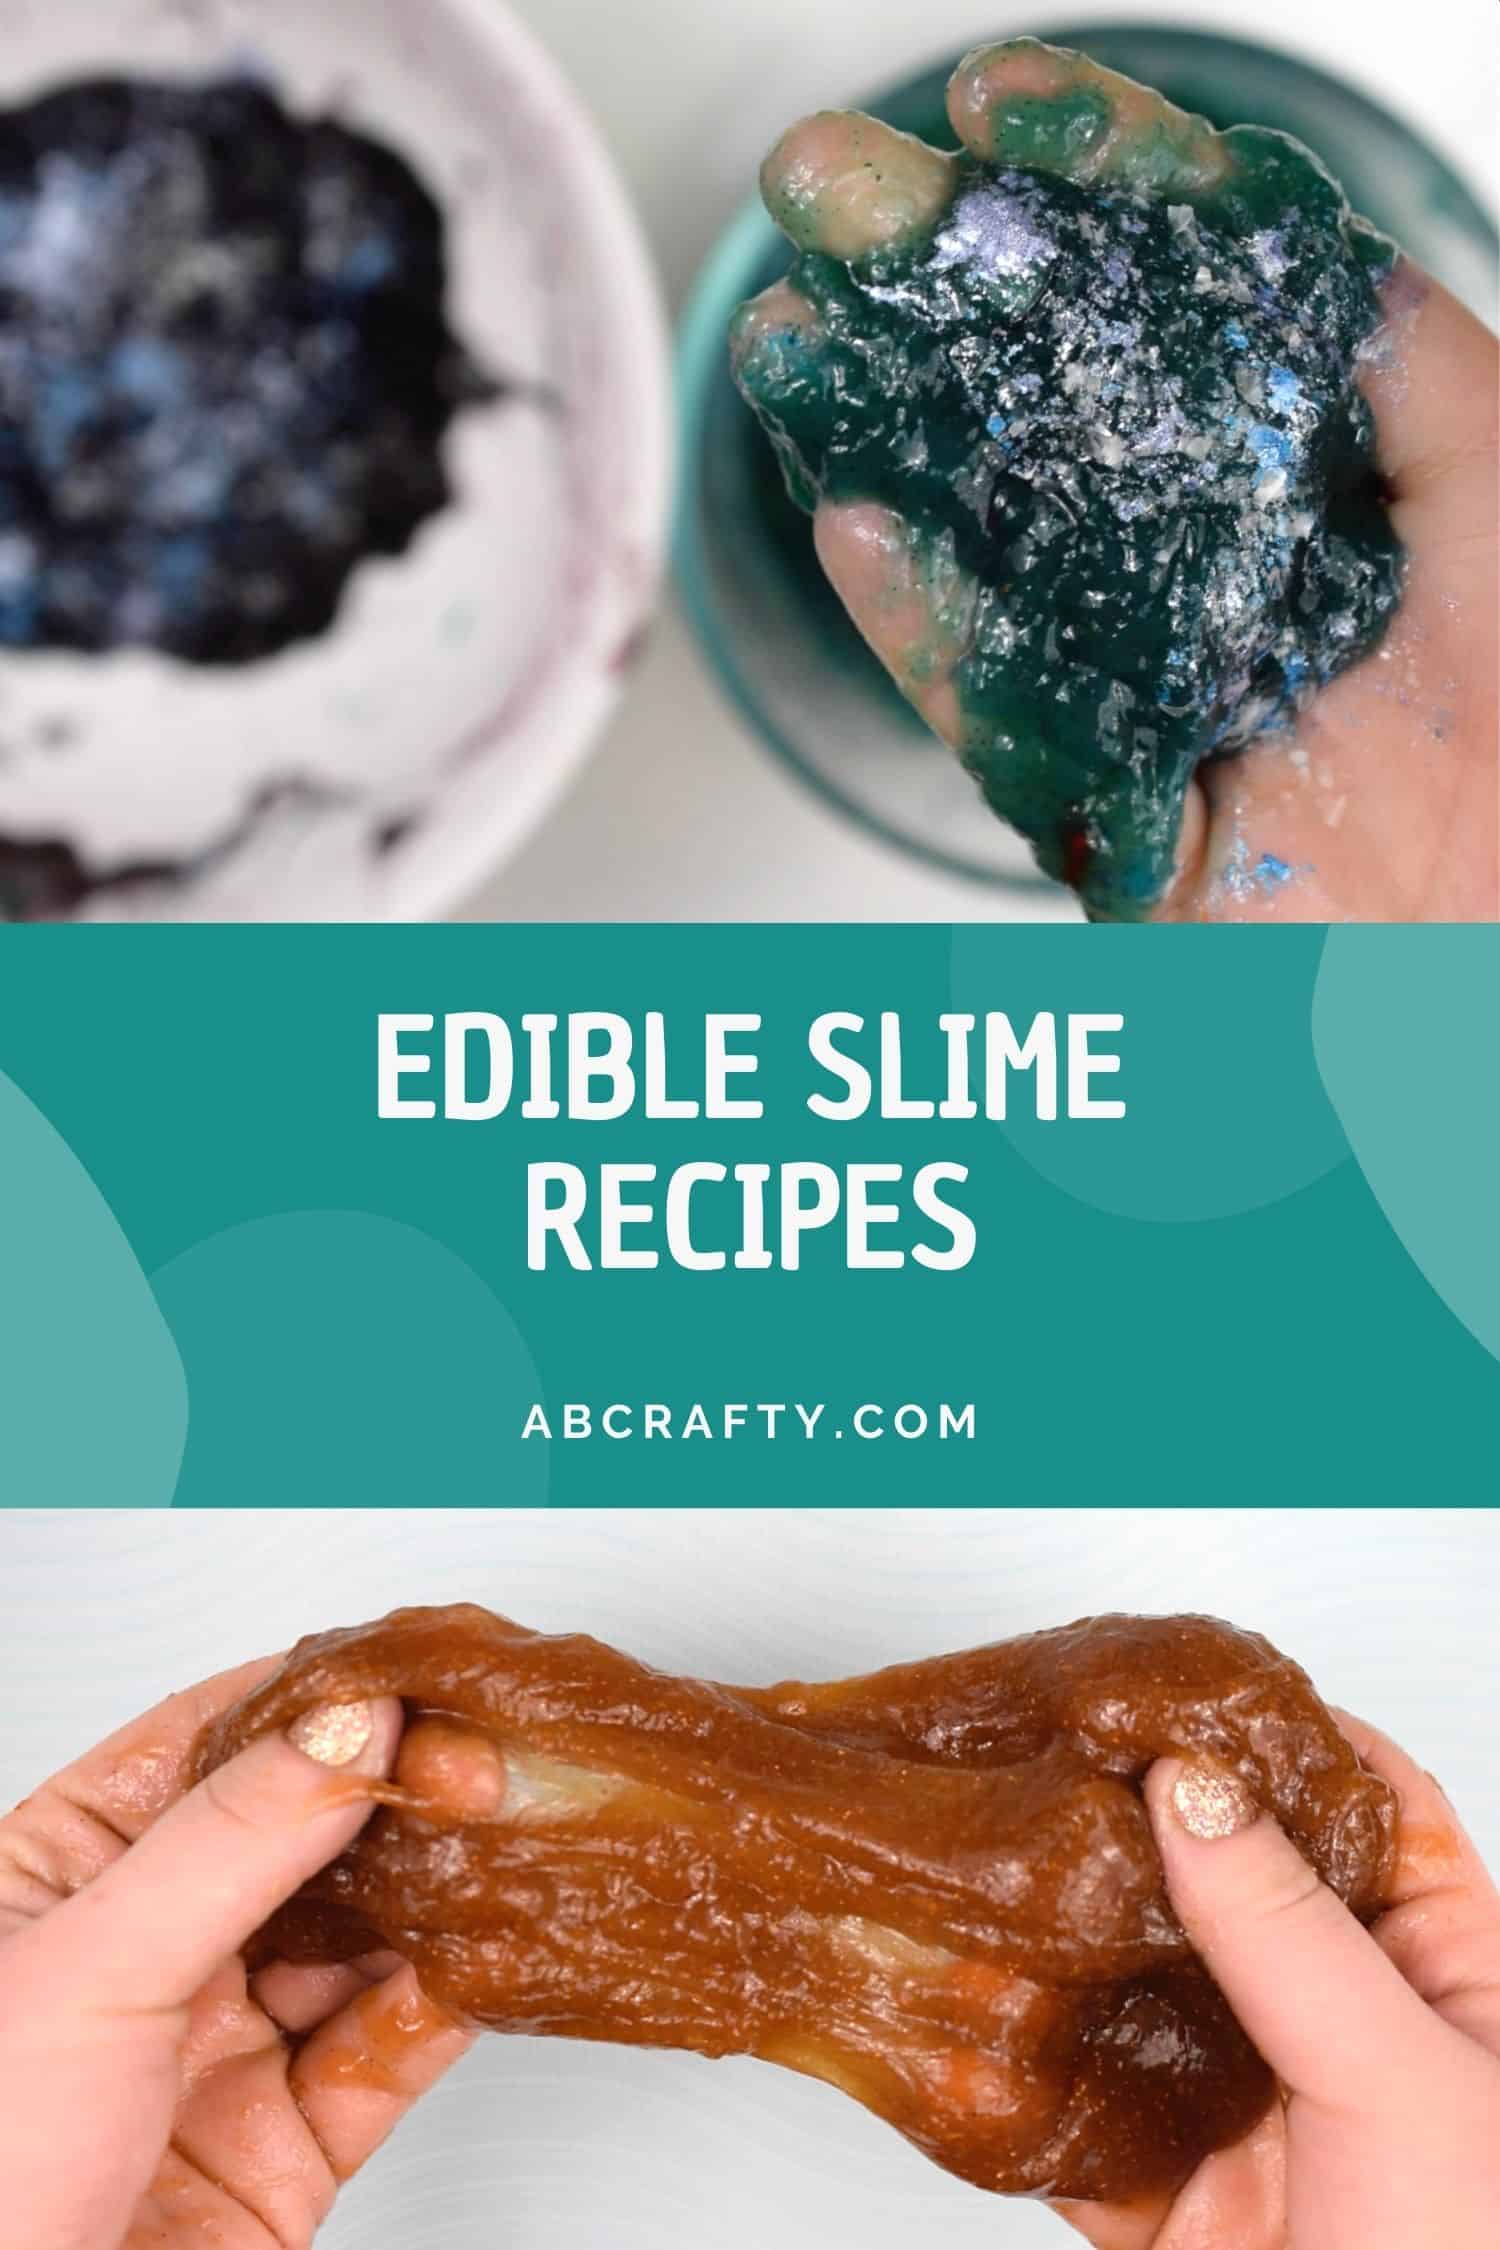 HOW TO MAKE CLEAR SLIME WITHOUT BORAX: A SAFE AND SIMPLE RECIPE 